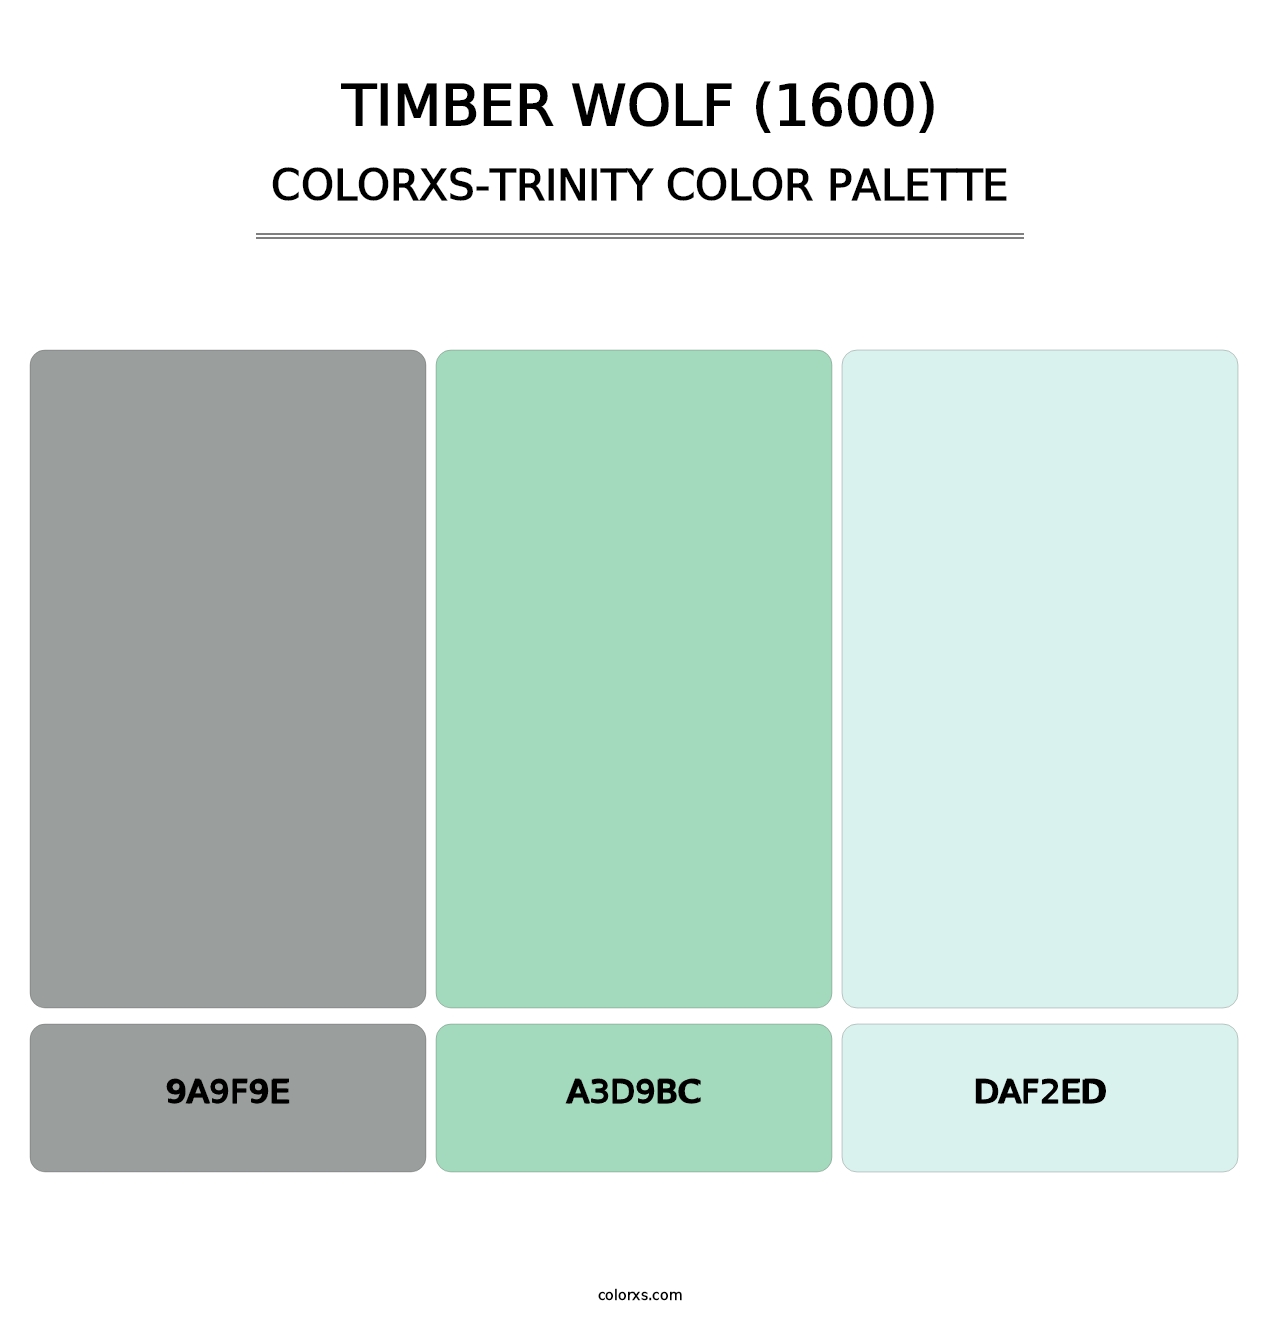 Timber Wolf (1600) - Colorxs Trinity Palette